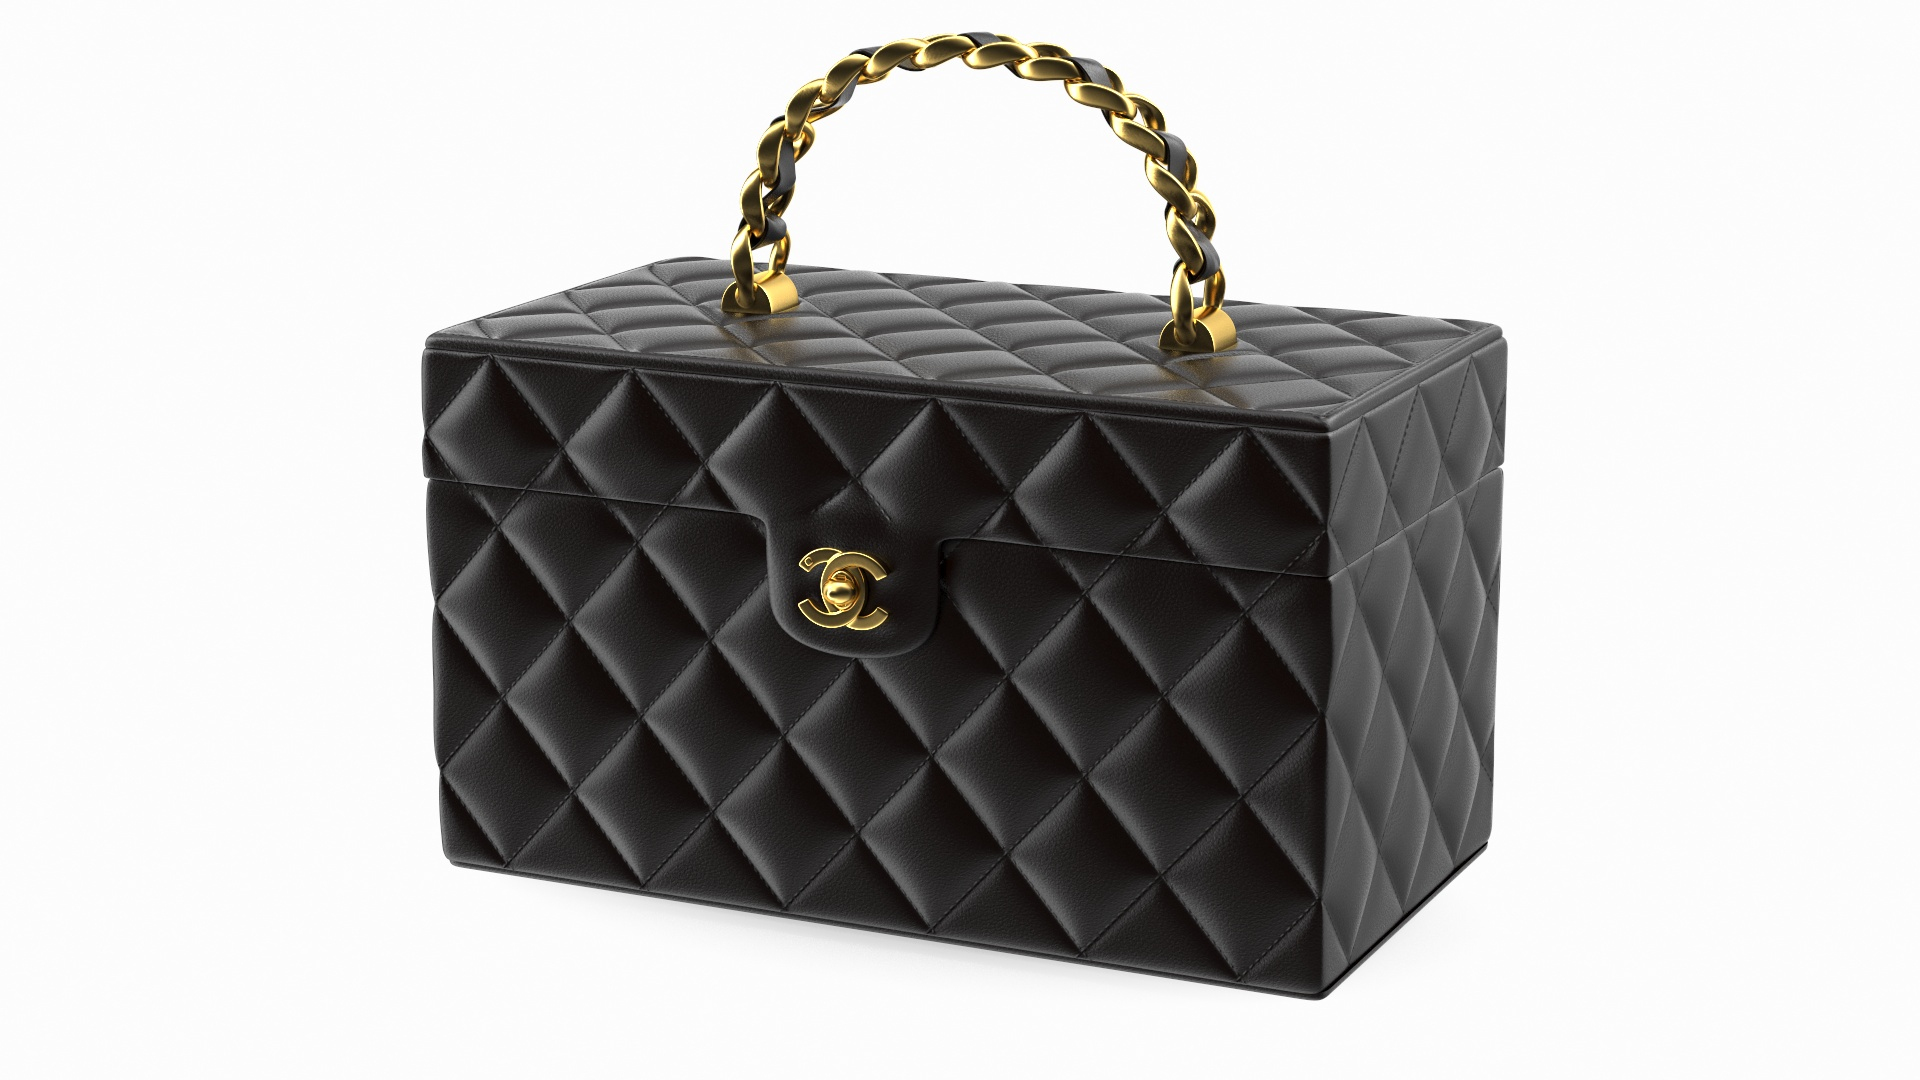 Chanel Quilted Vanity Case Bag  Chanel vanity case, Bags, Chanel bag